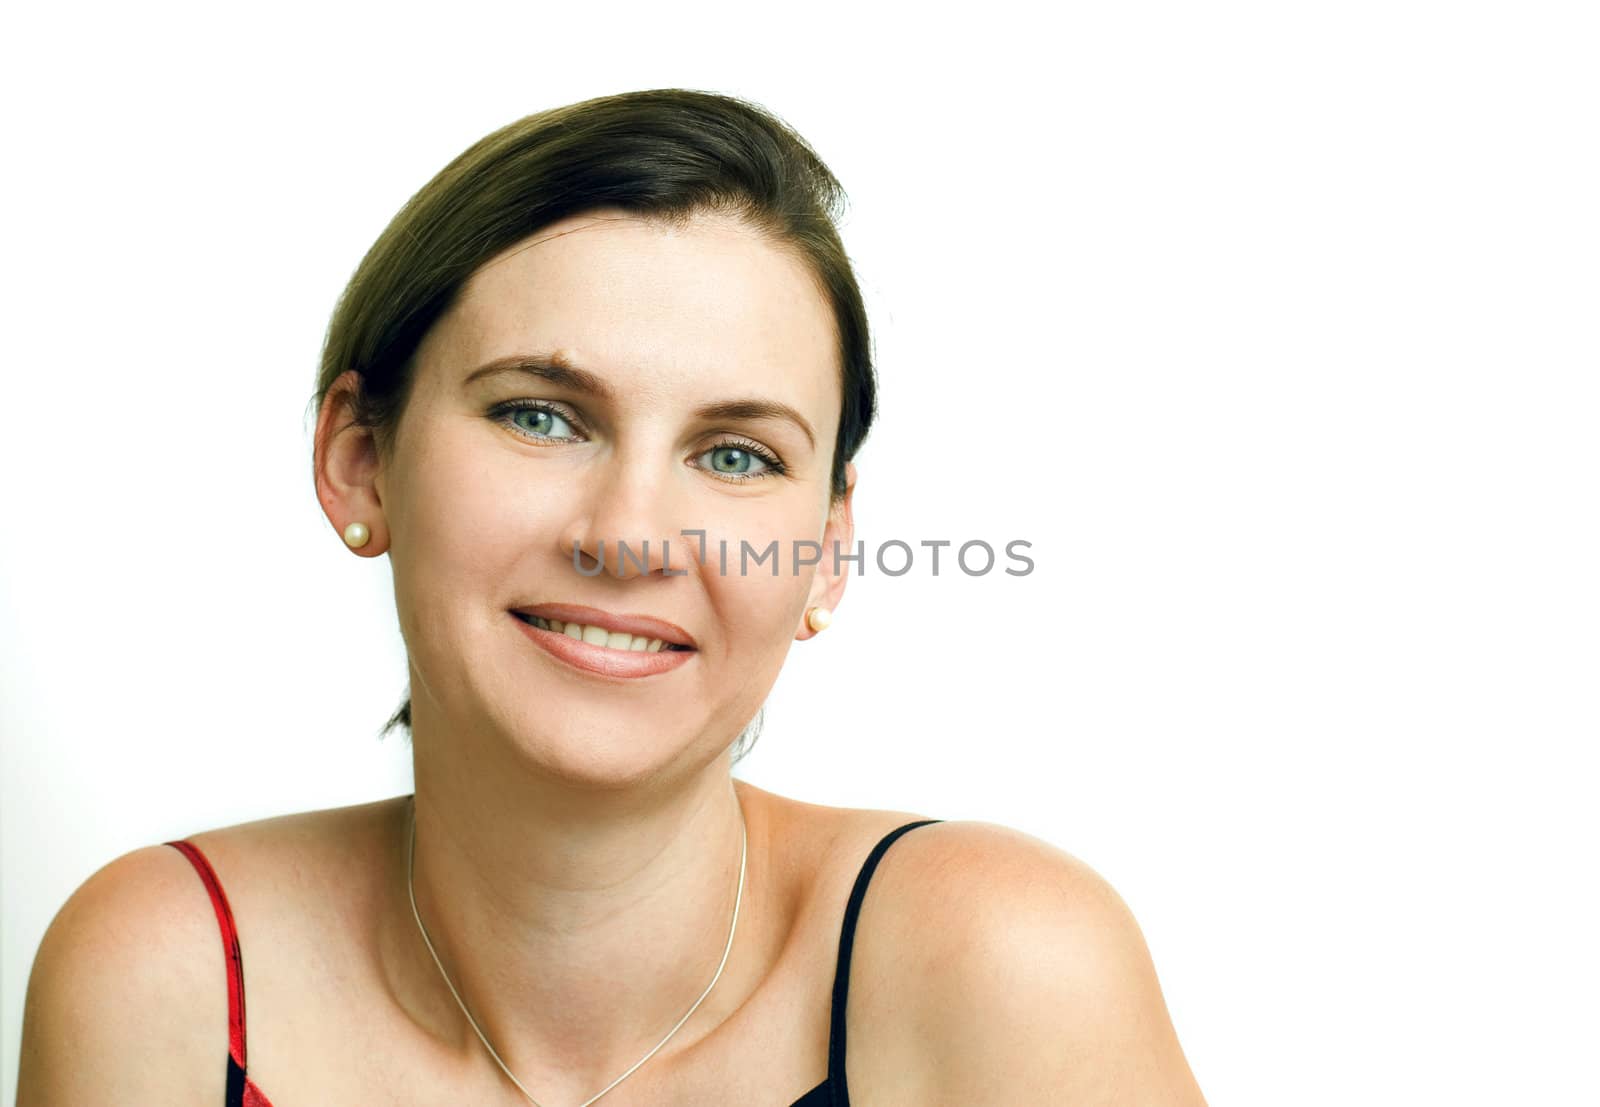 Portrait of smiling young woman on white background.